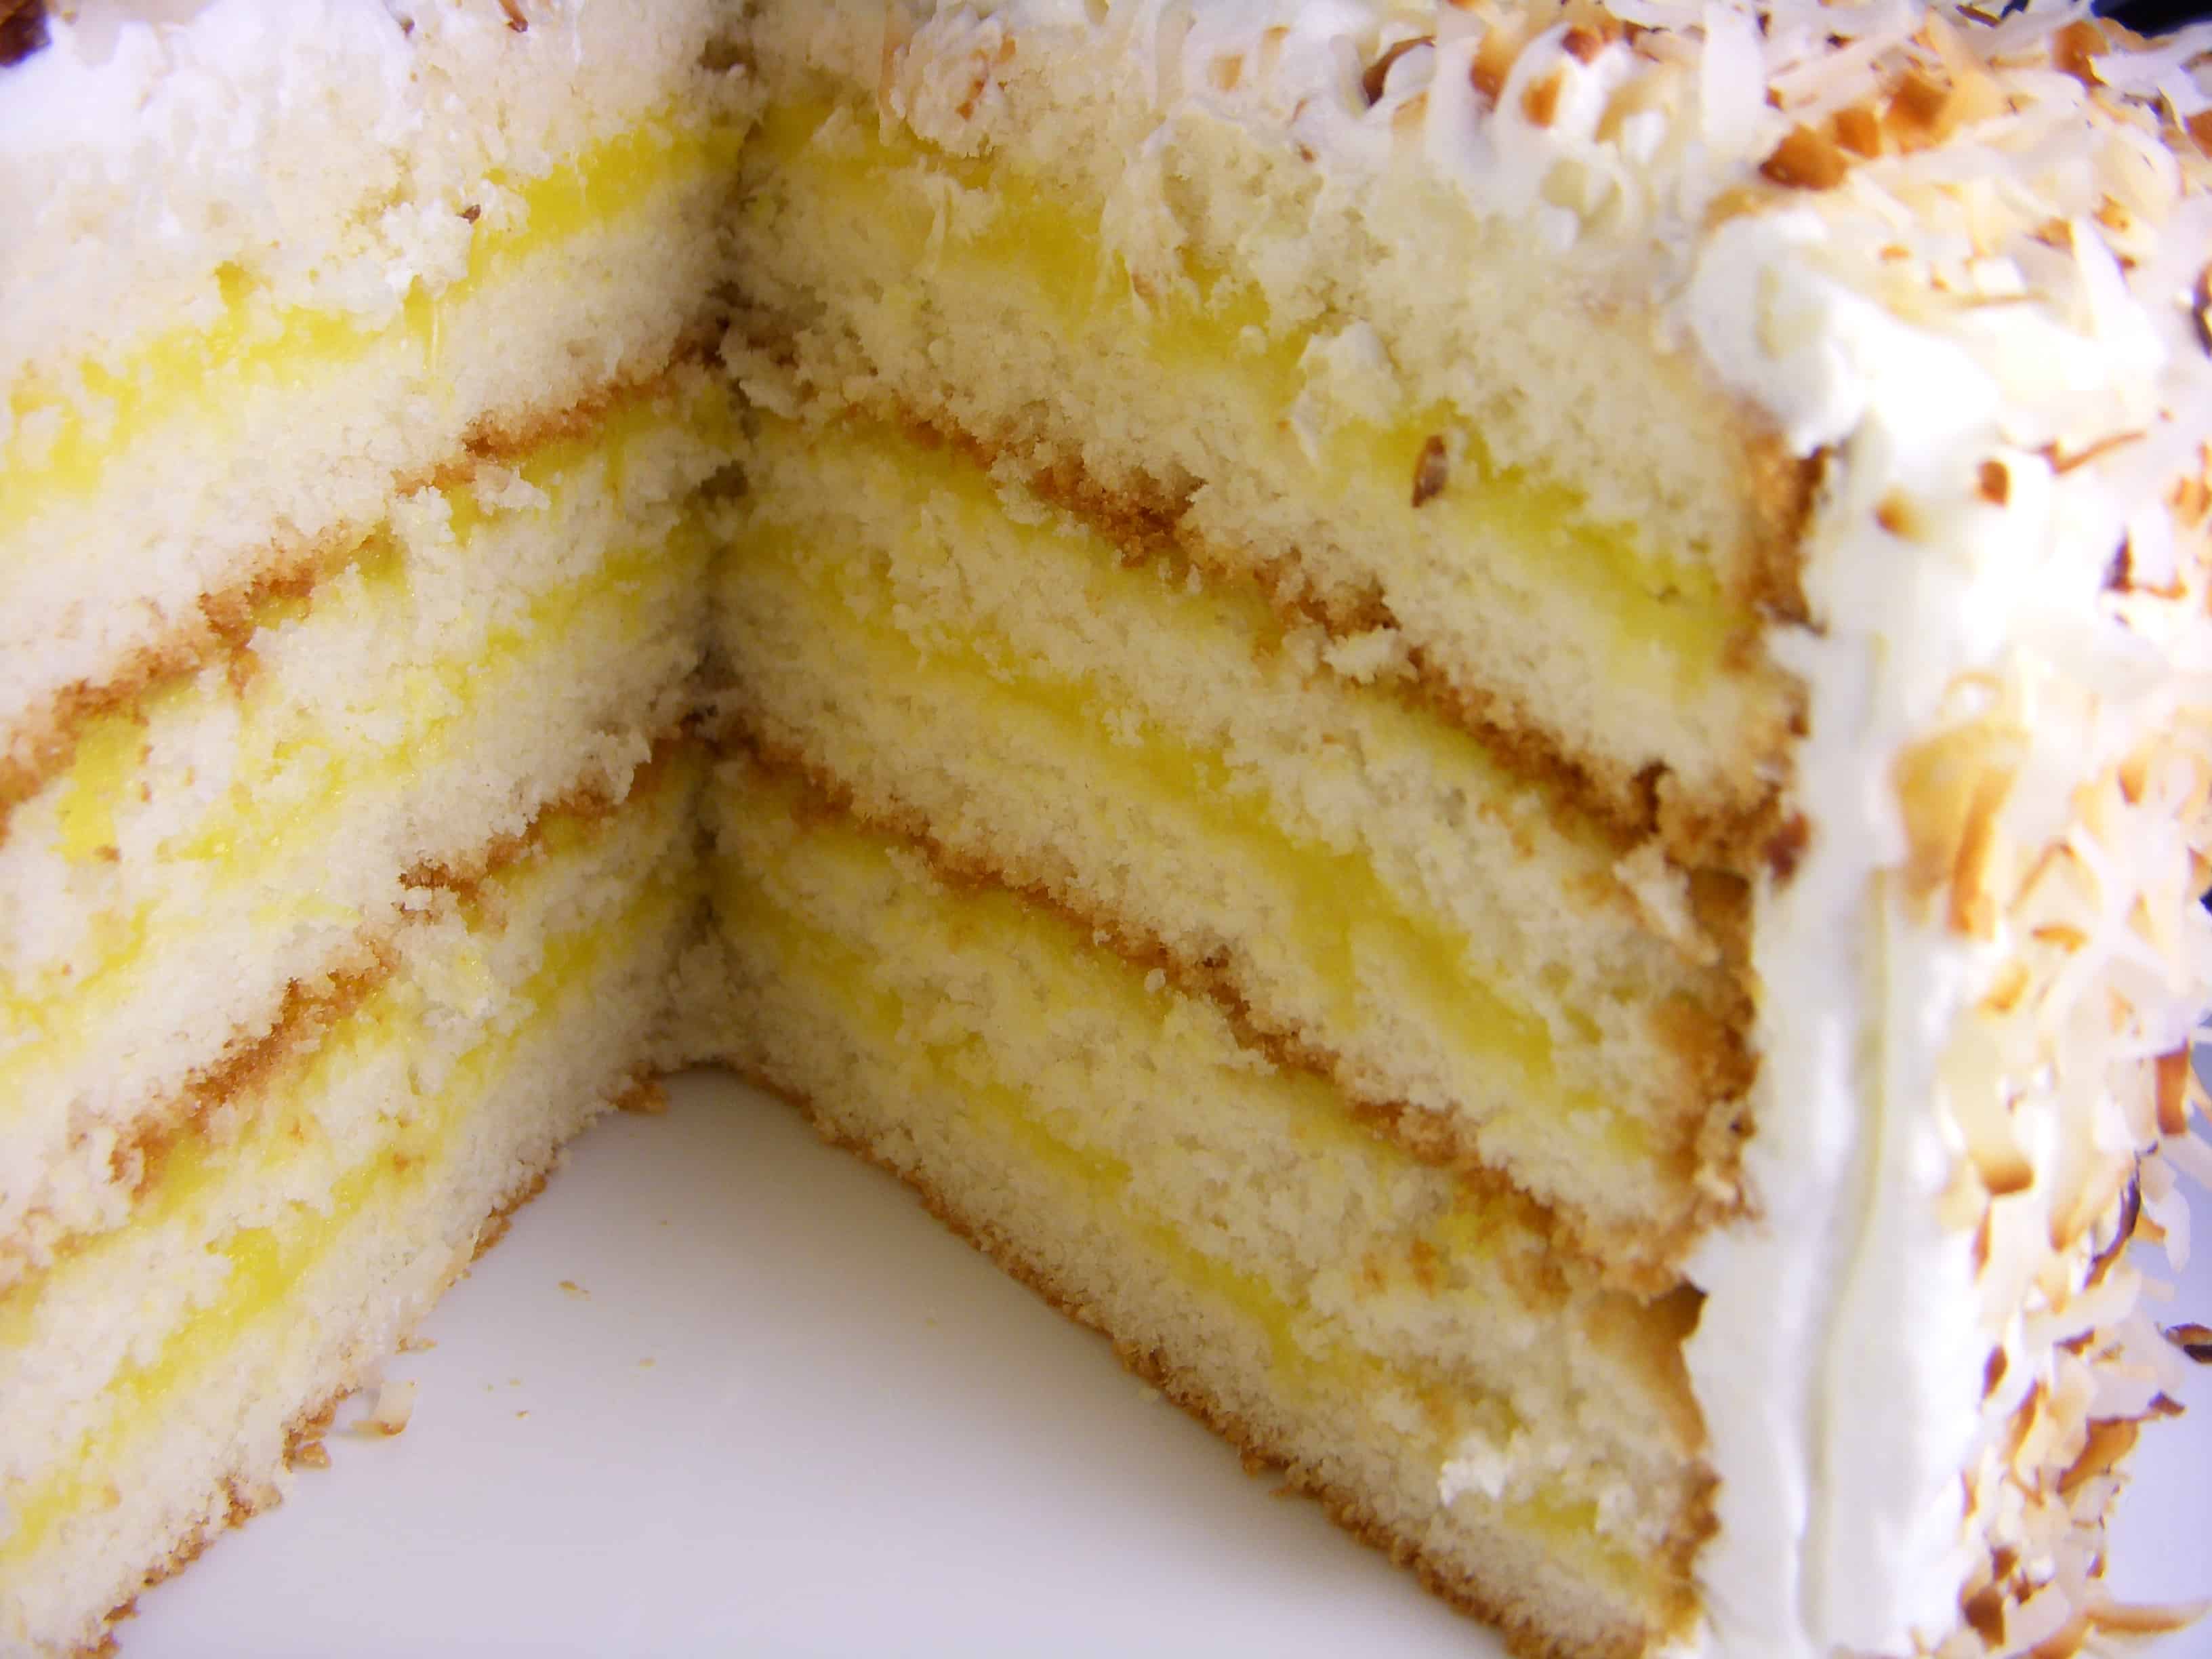 Six layer coconut cake with mango filling